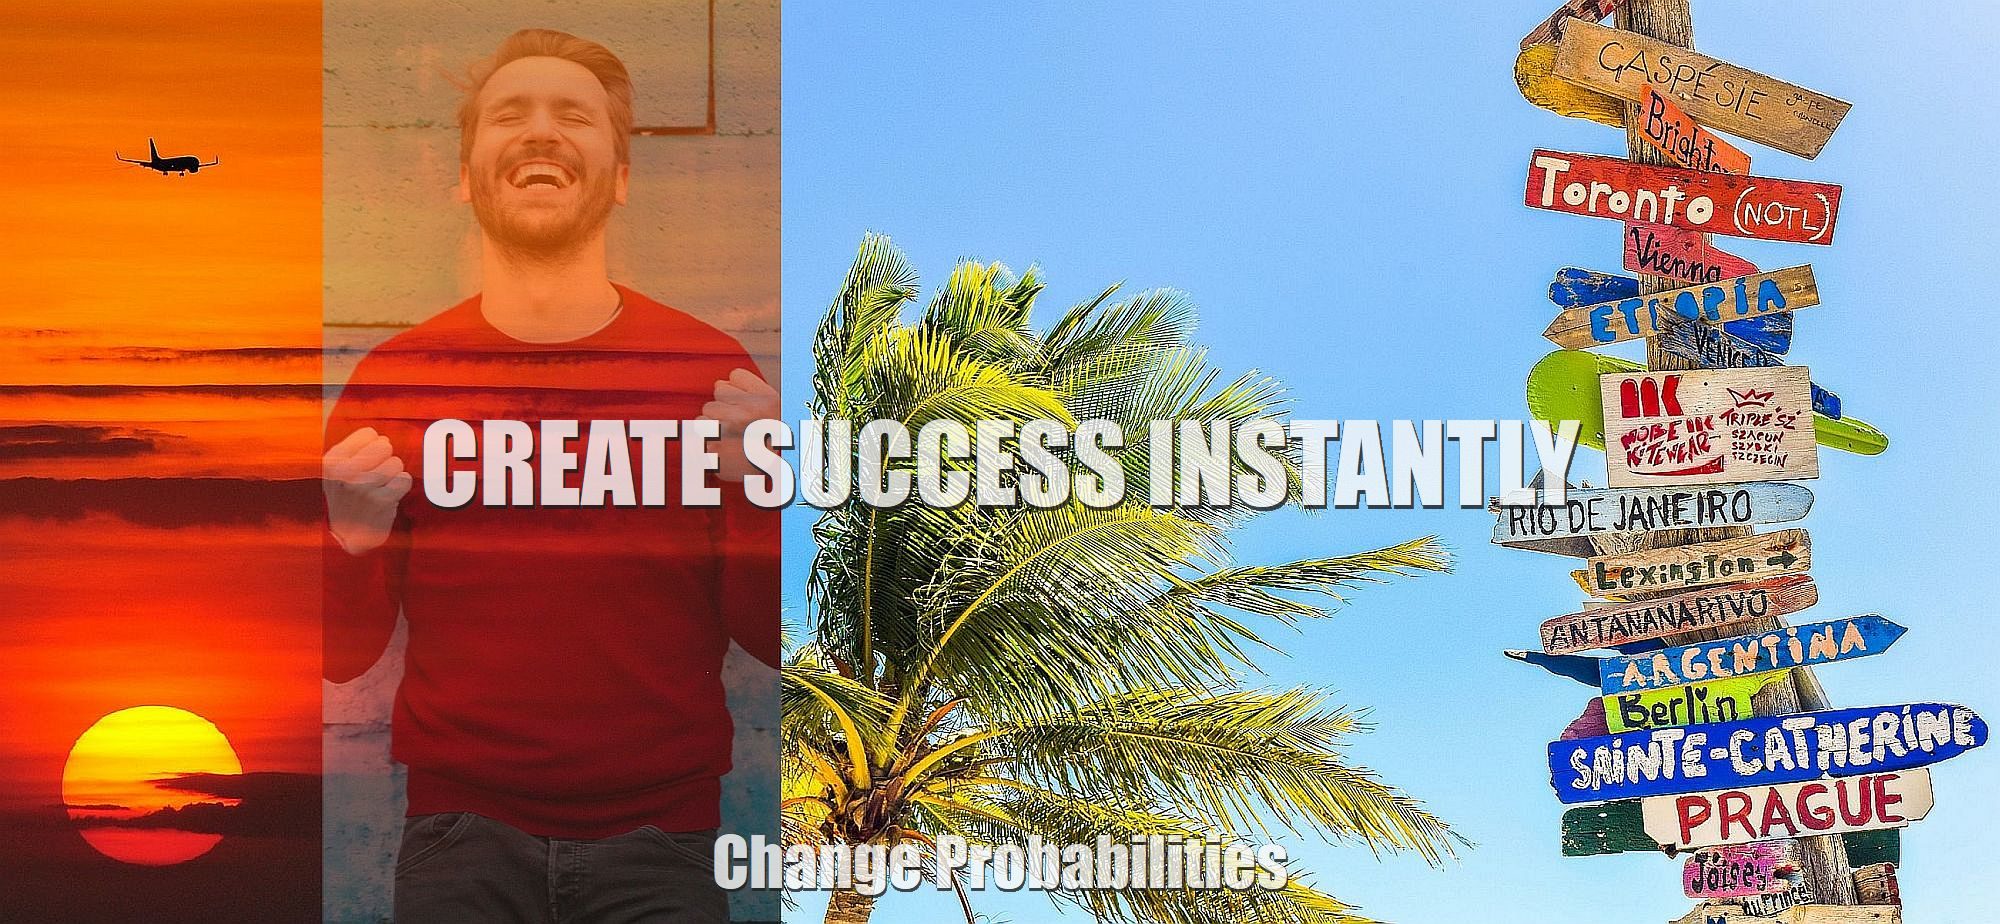 How Do I Create Success Instantly Mind Over Matter - 